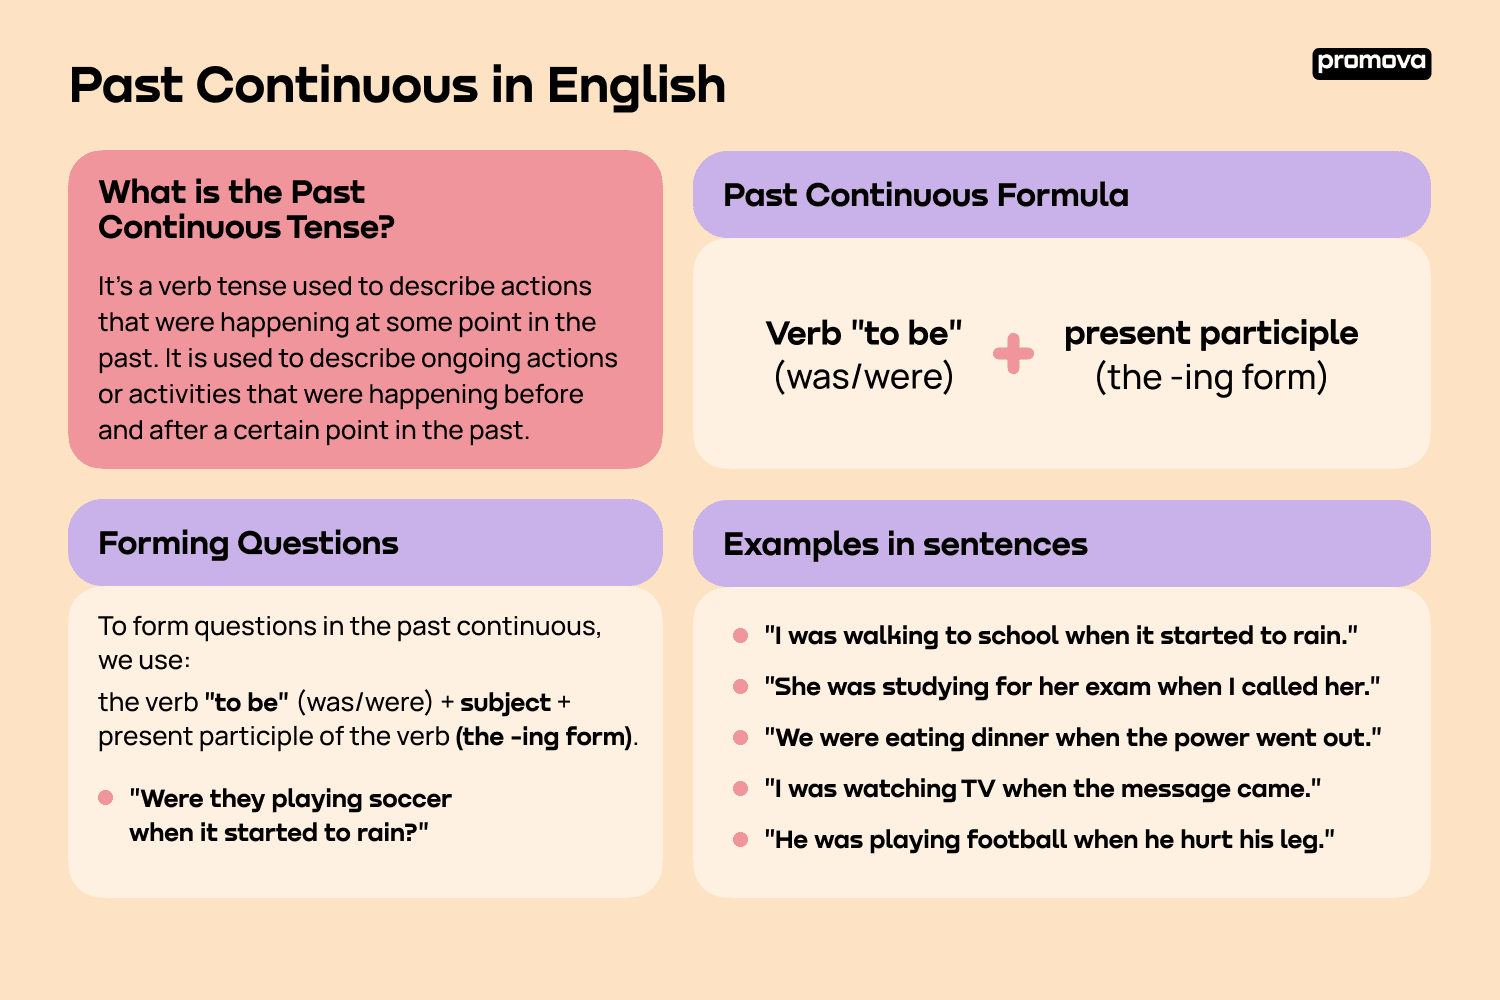 Past Continuous in English